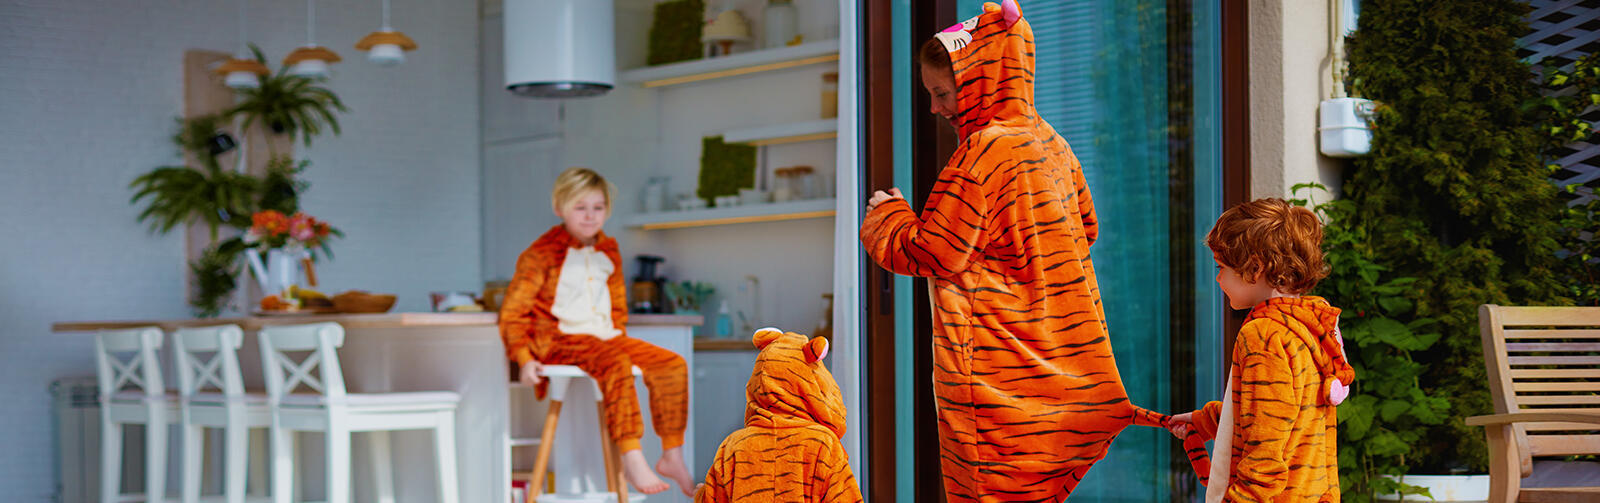 A young family with three children wear tiger onesies. The adult is walking into the apartment, while two children follow. The third child sits on a high top chair smiling at them.